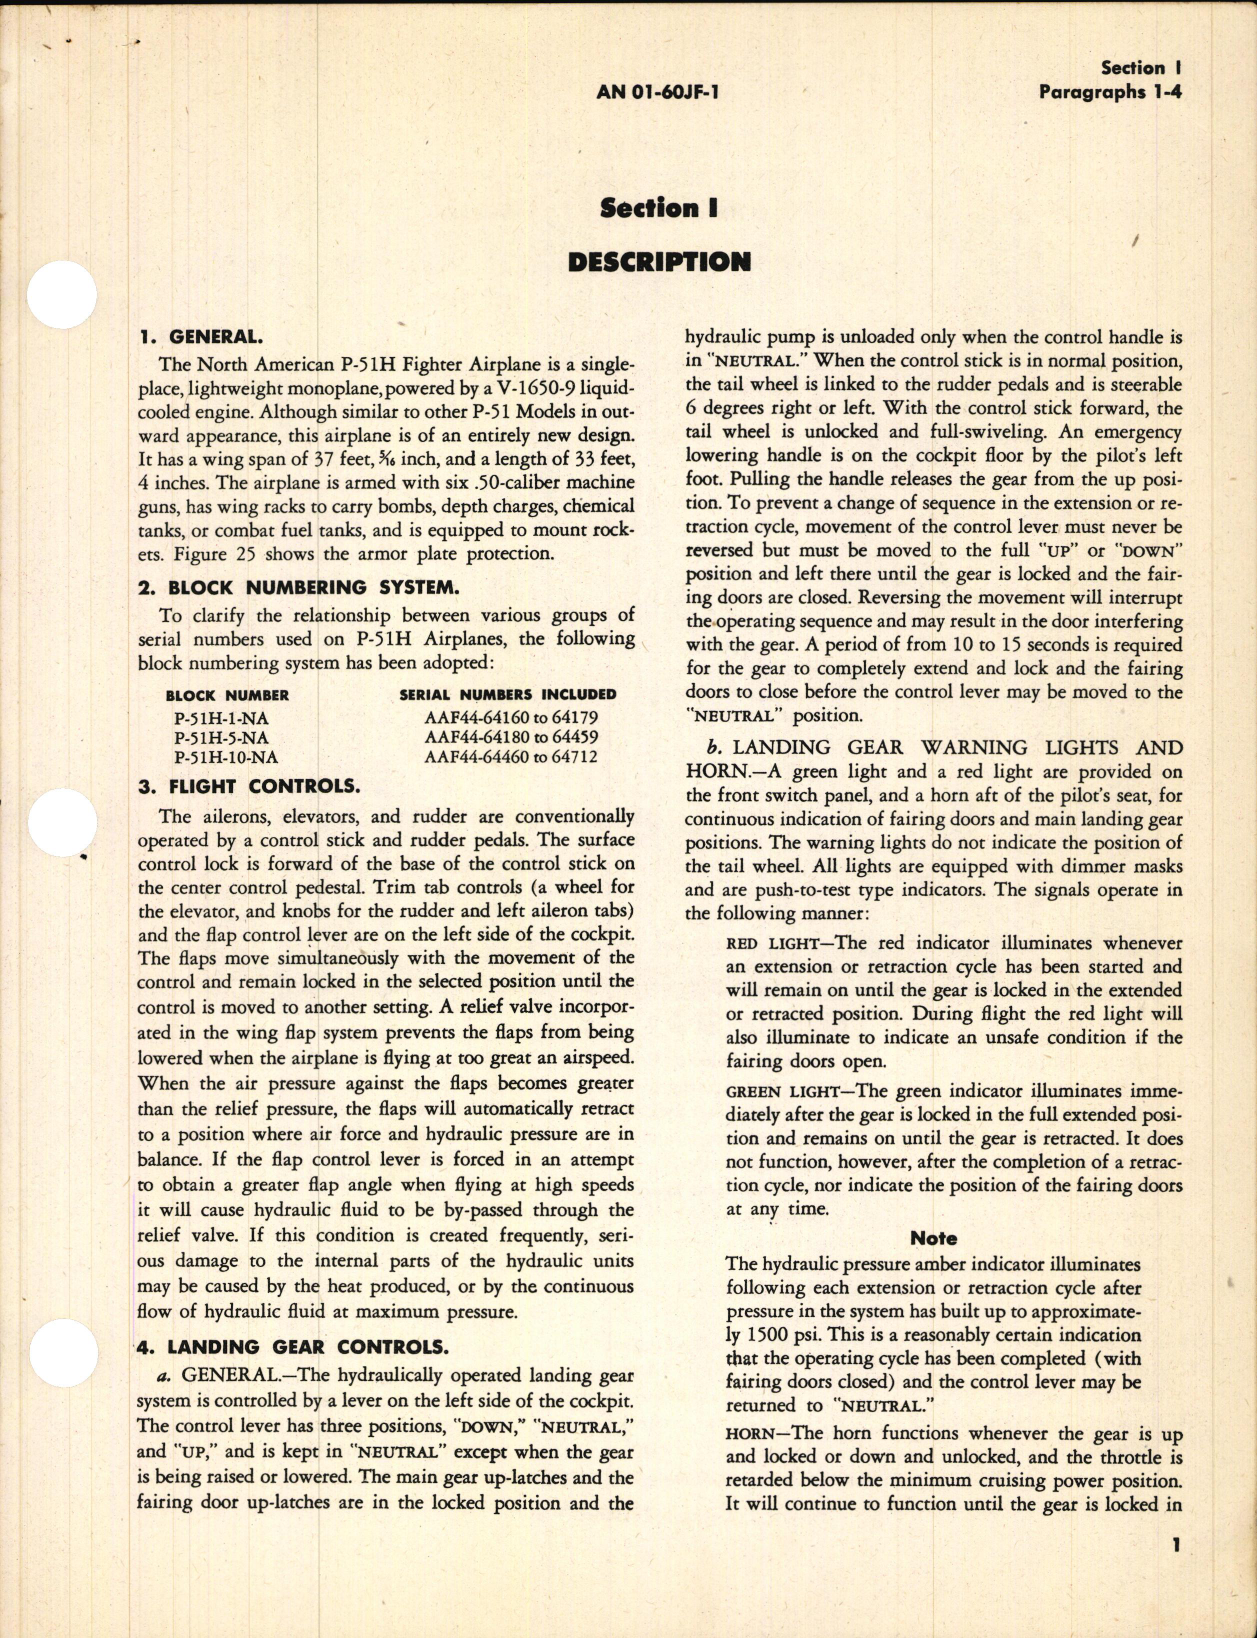 Sample page 5 from AirCorps Library document: Pilot's Handbook for P-51H-1, -5, and -10